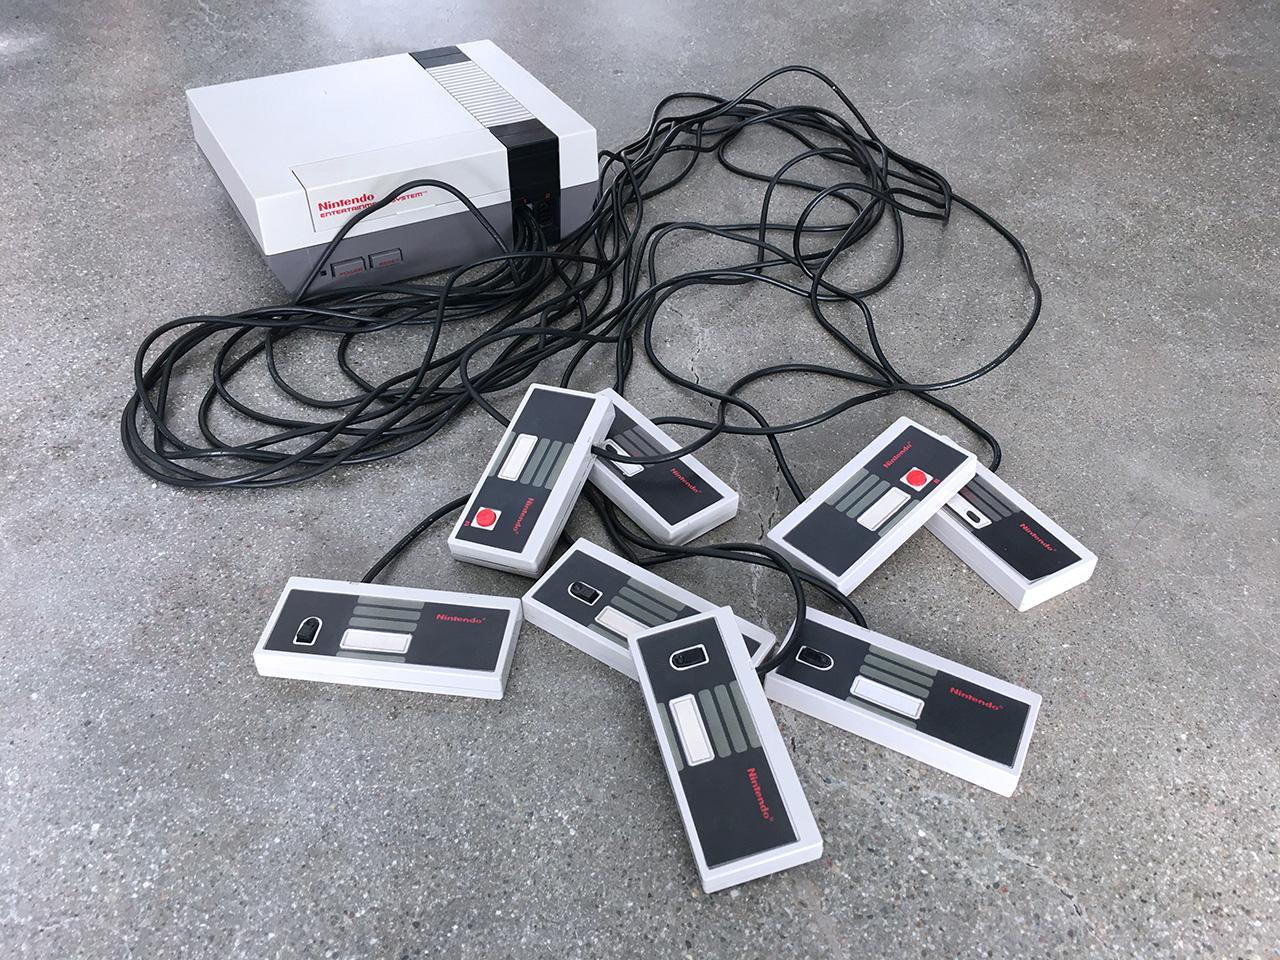 A photograph of the Octopad's eight one-switch controllers alongside a Nintendo Entertainment System.